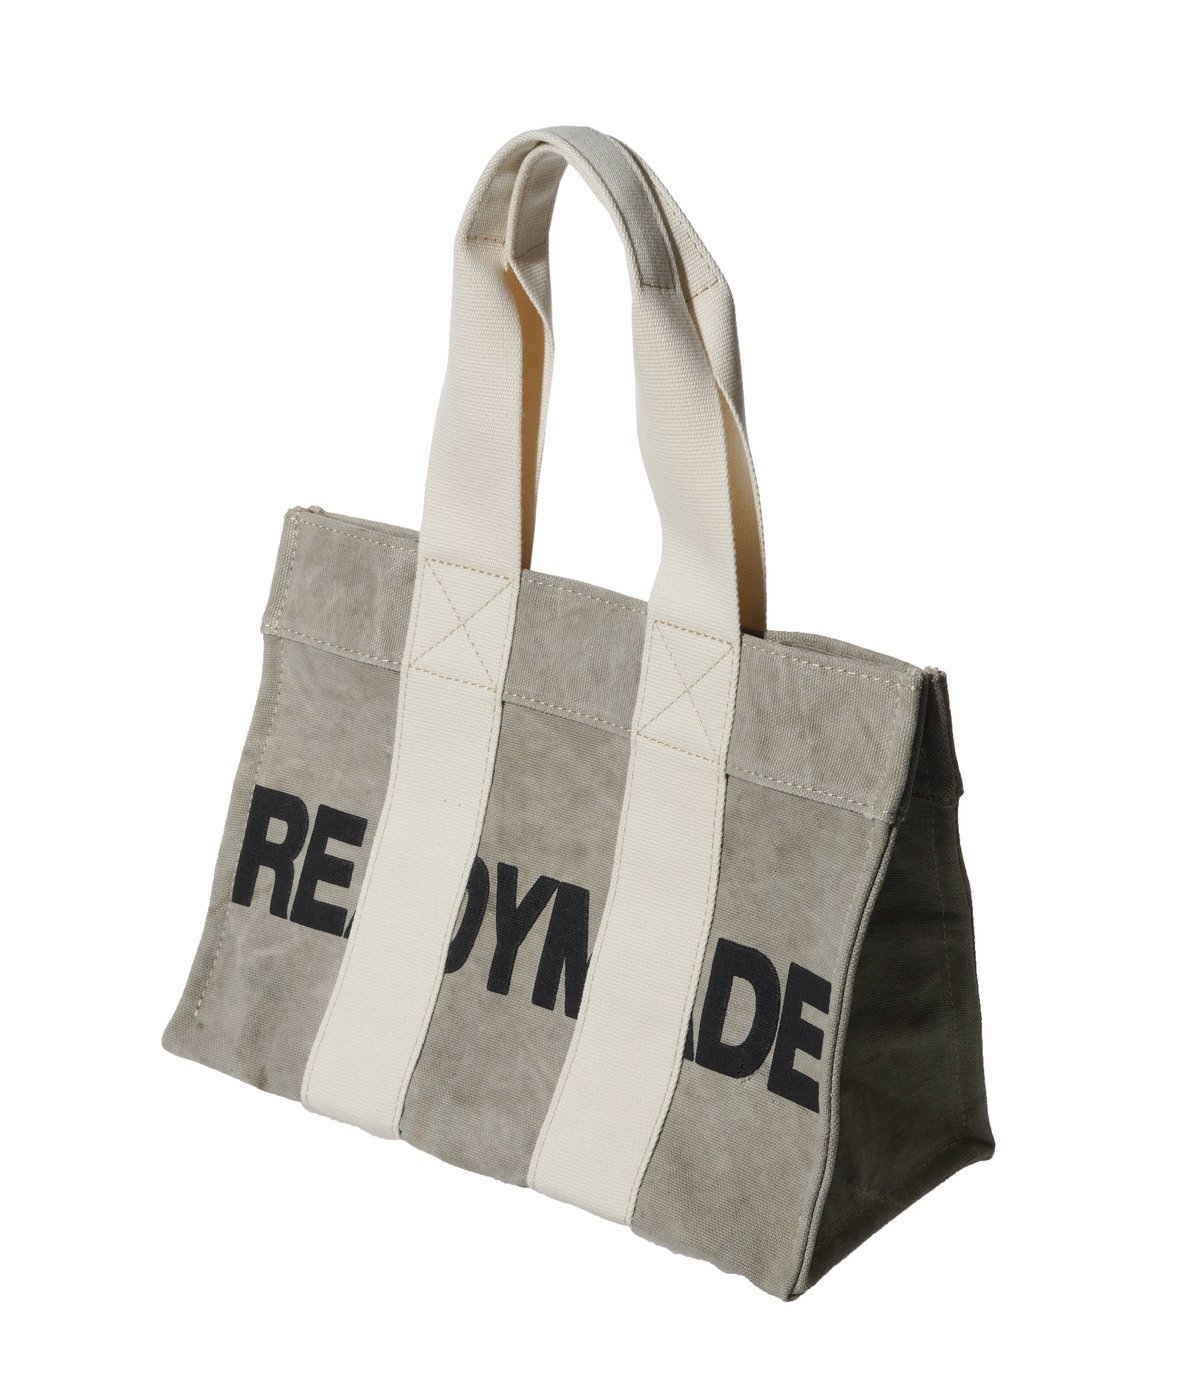 EASY TOTE SMALL | READYMADE(レディメイド) / バッグ トートバッグ